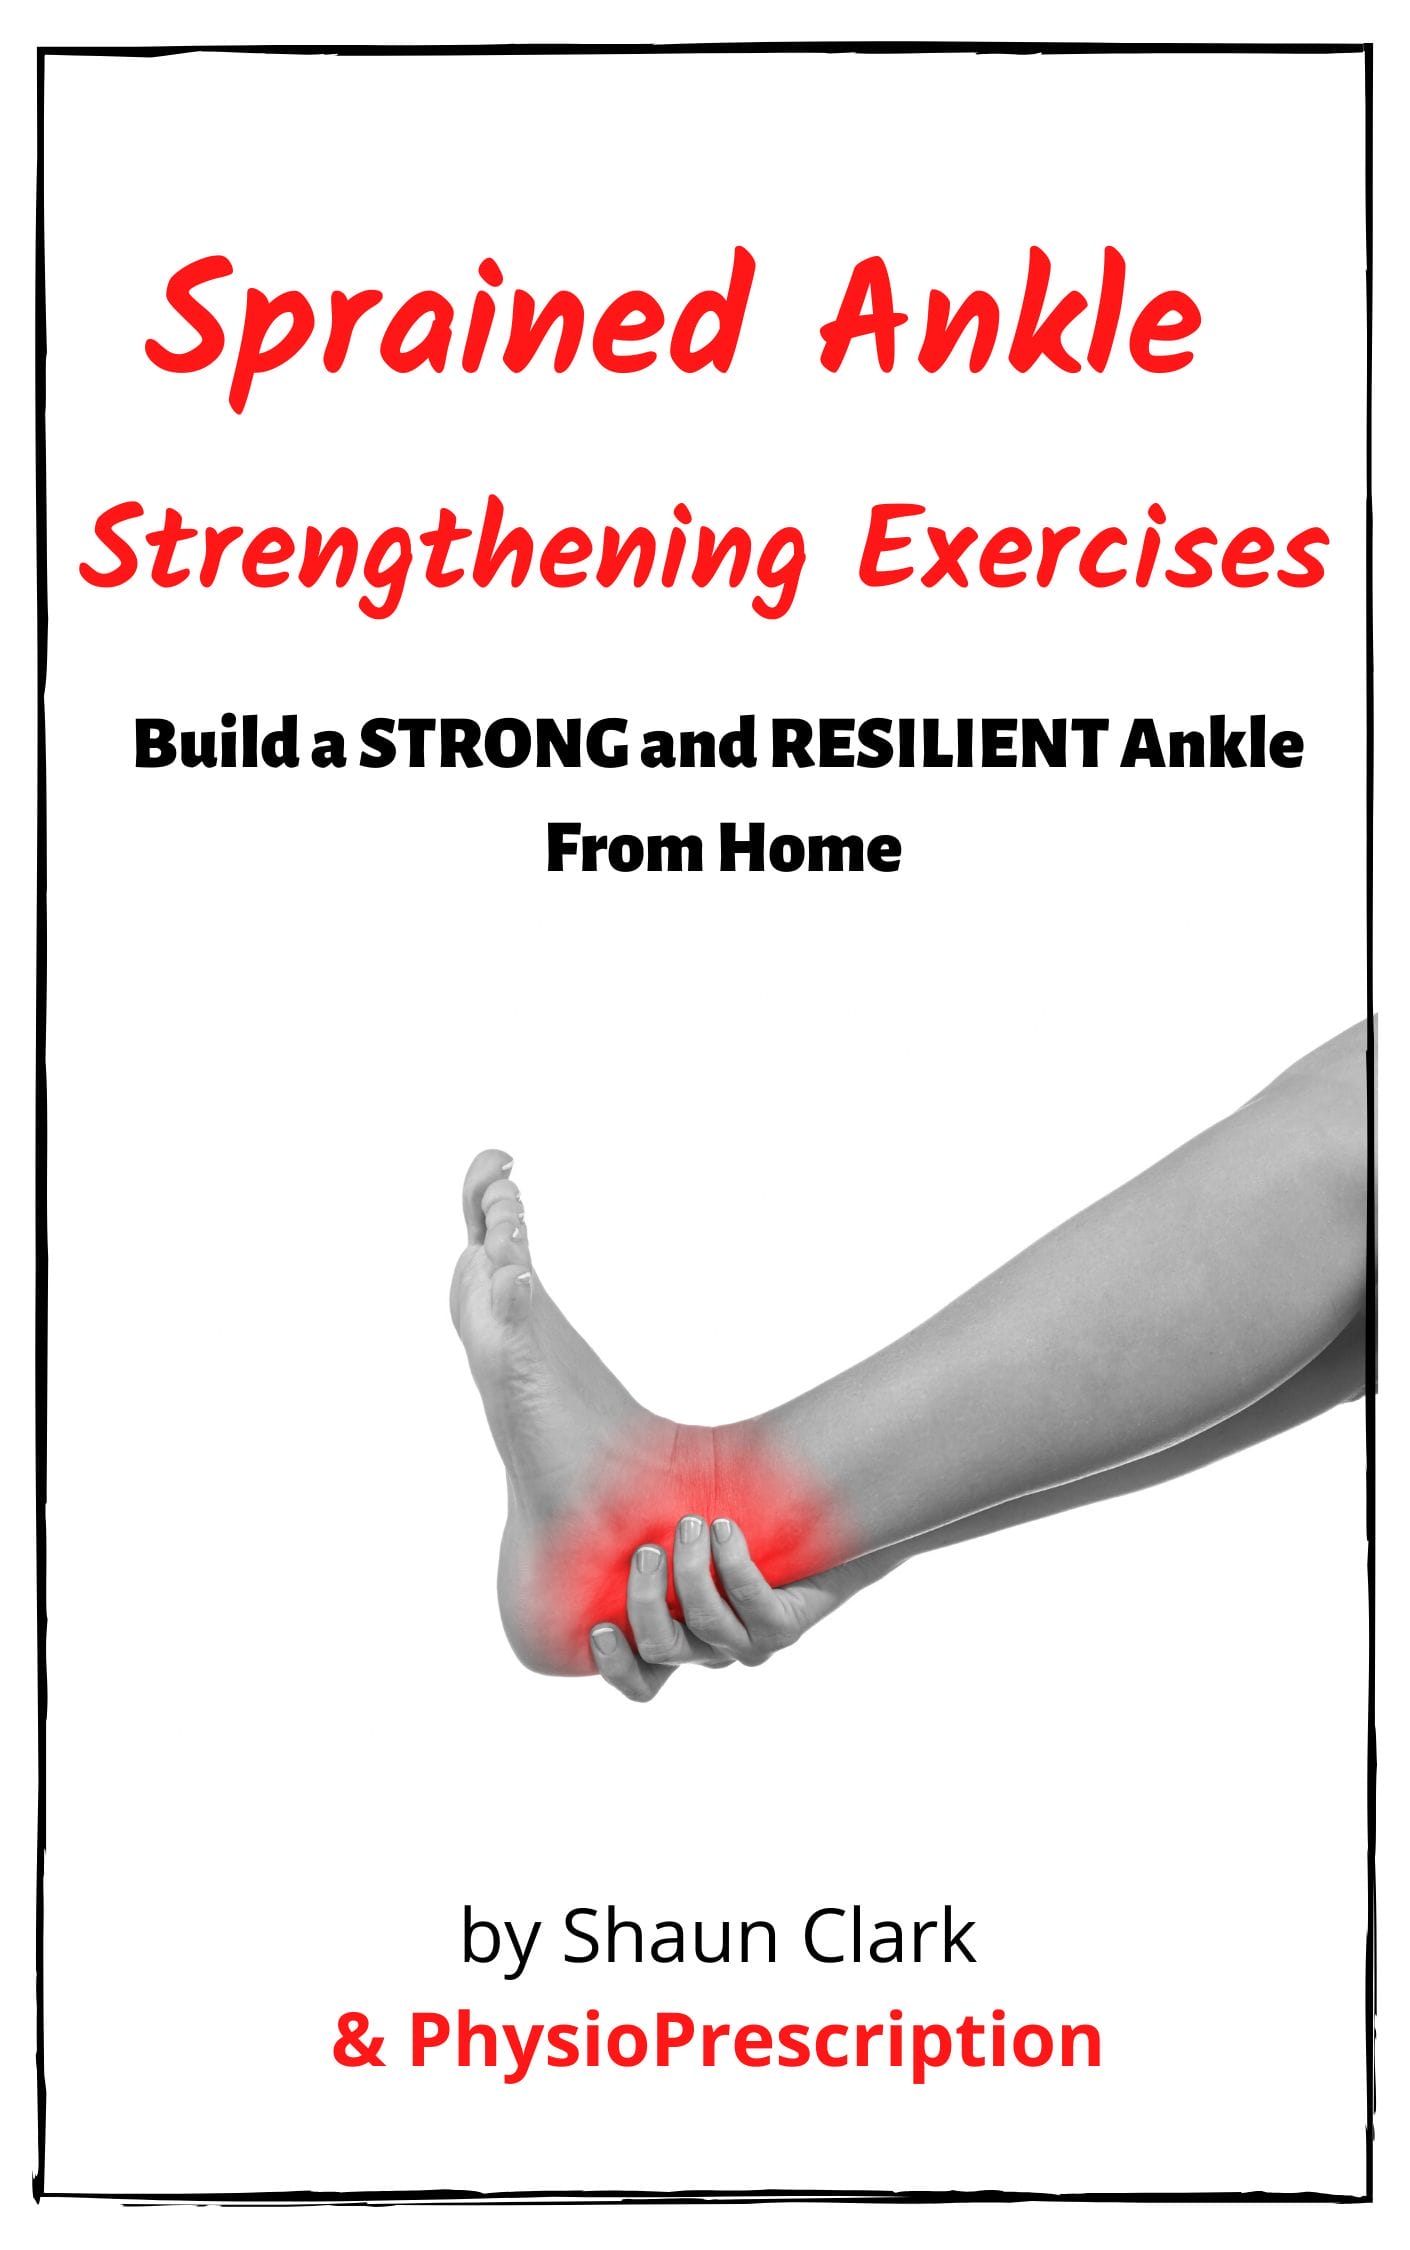 Sprained Ankle? Check these exercises out 👇  💪Strengthen Your Ankle💪  Sprain your ankle playing sports or being active 🎾? Decided to break in  your new pair of shoes that didn't QUITE